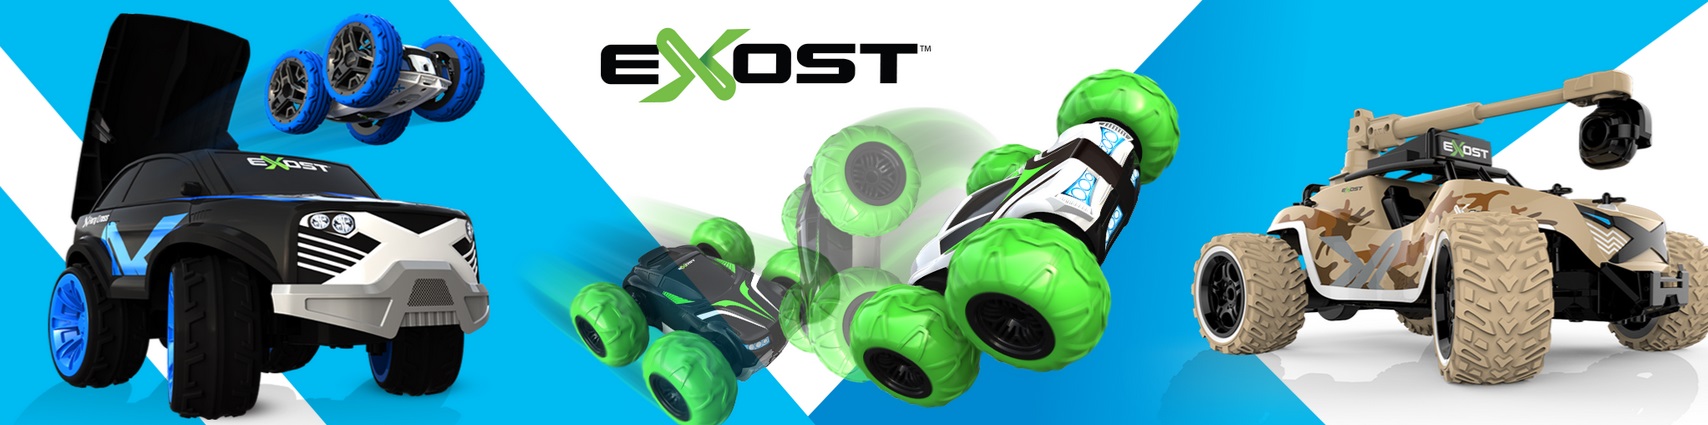 Exost remote controlled cars